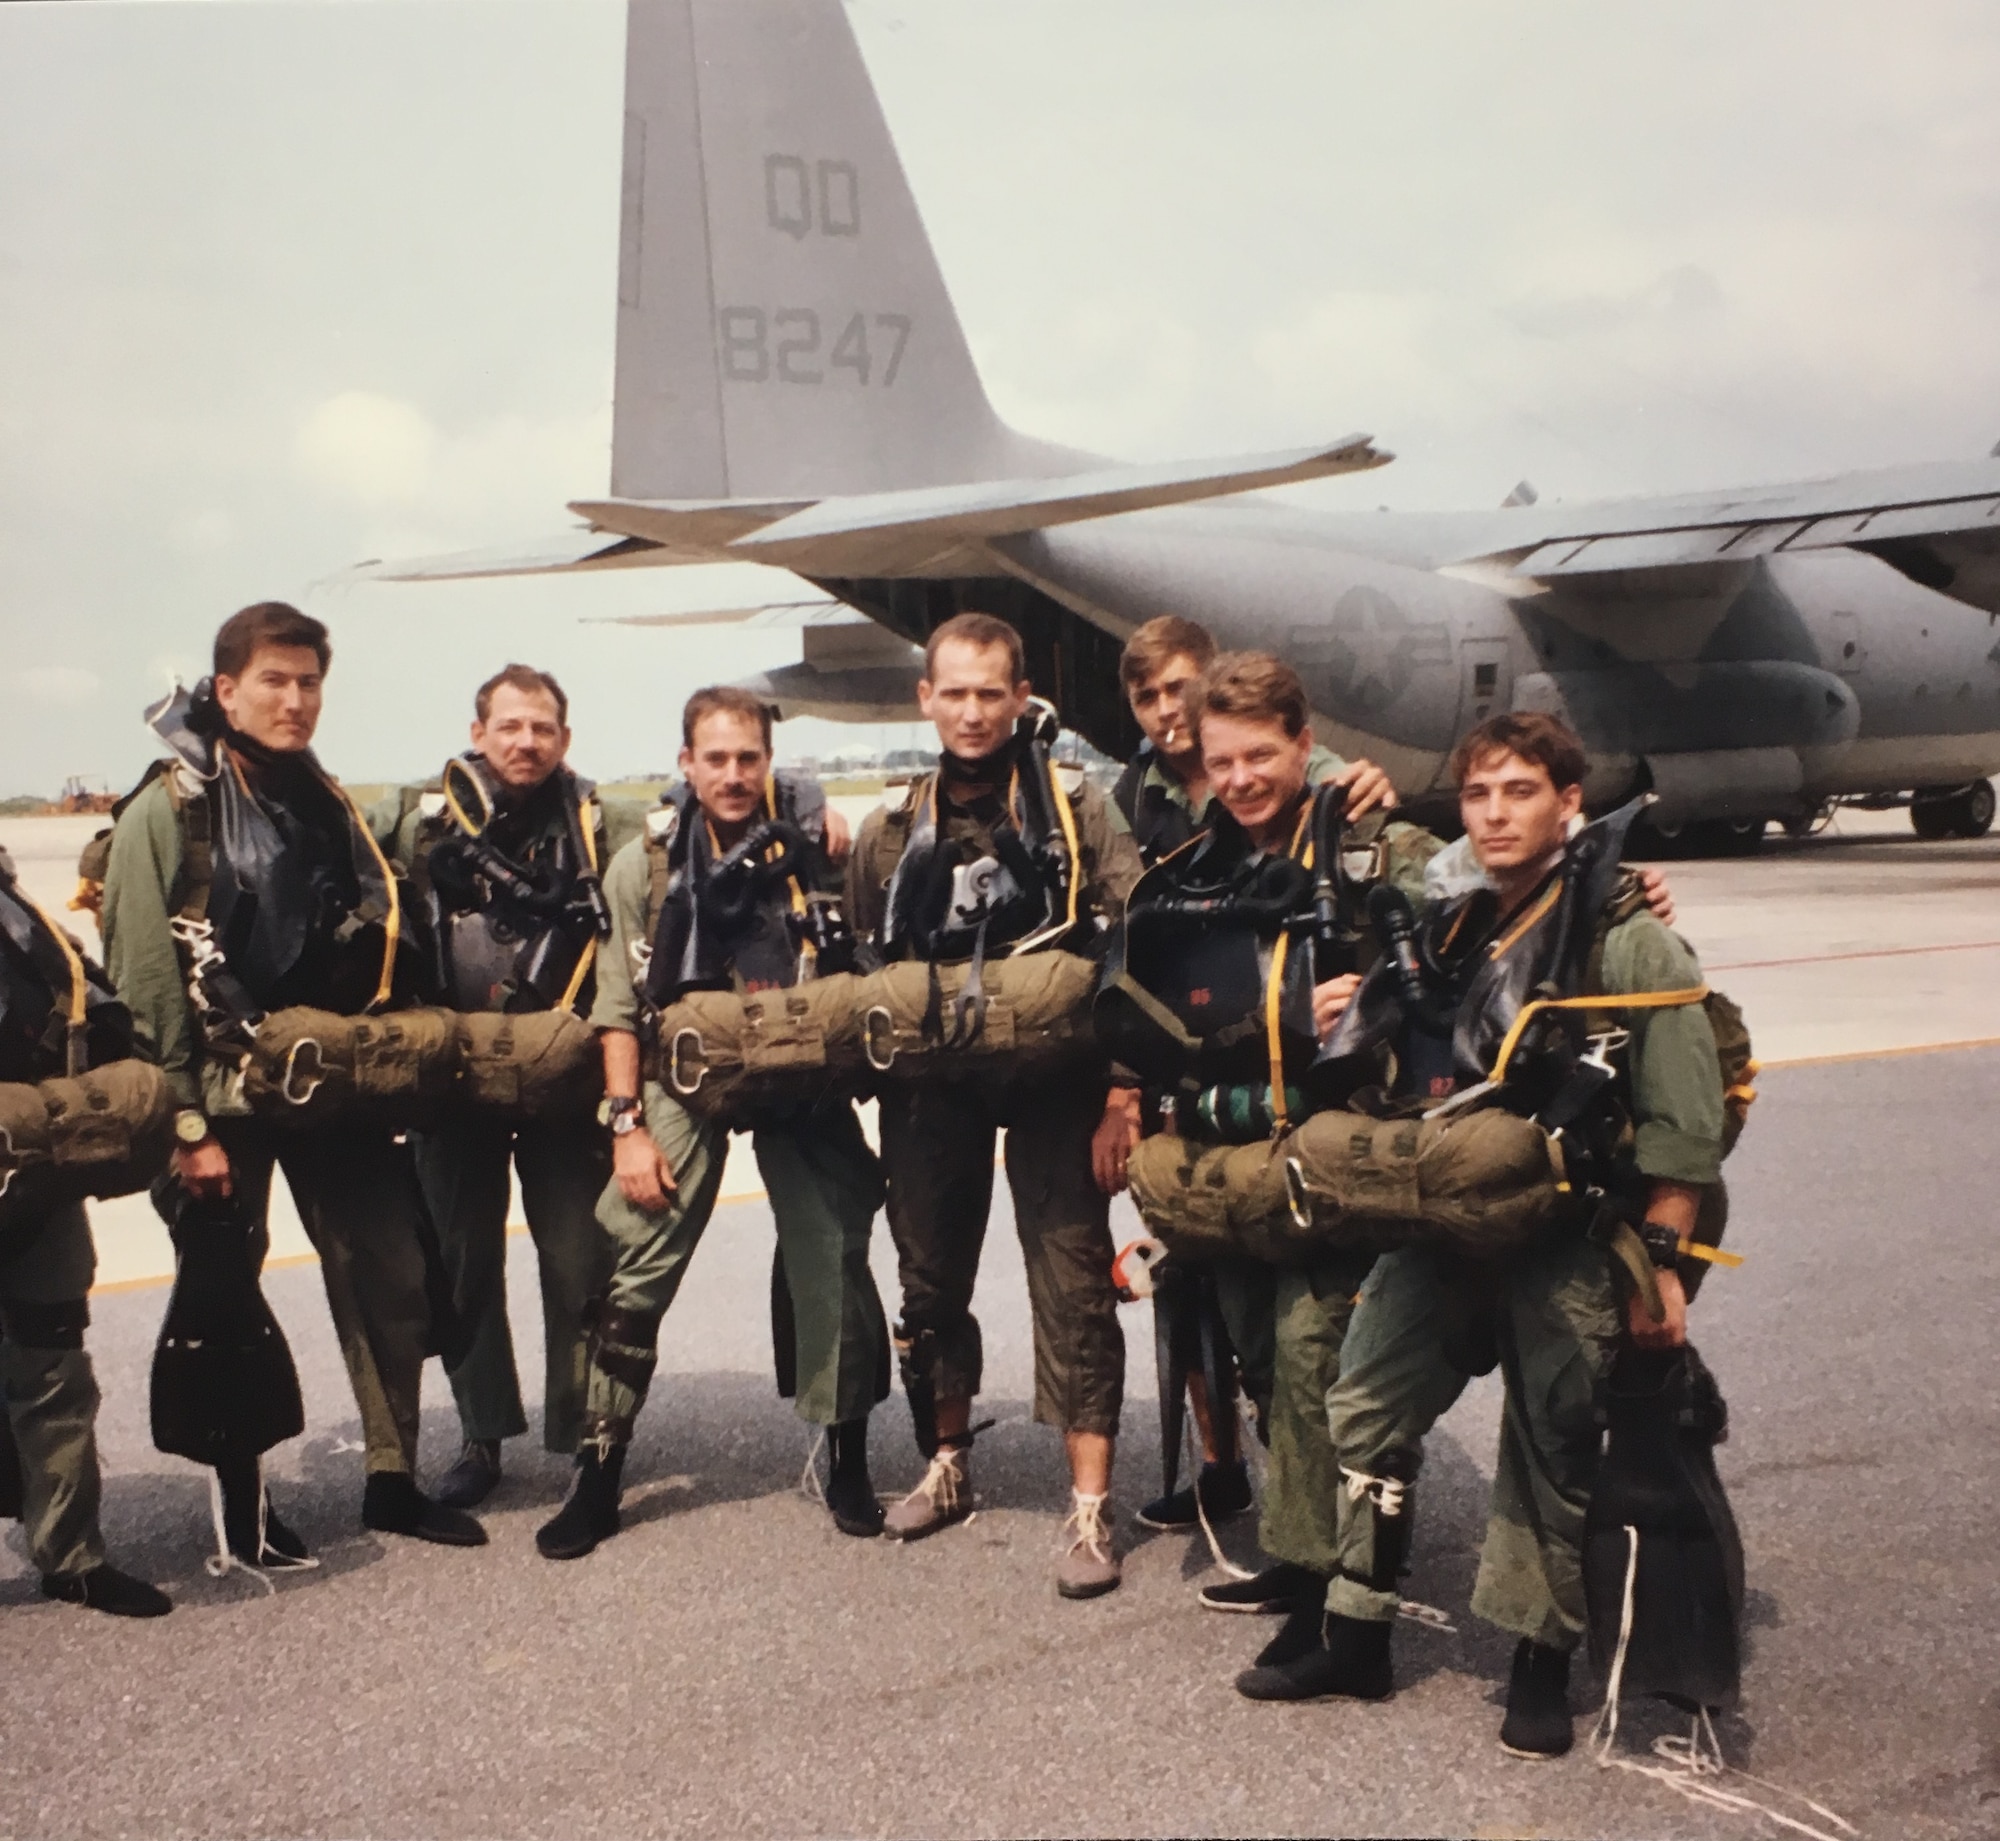 Now-Air Force Lt. Col. Robert Heil, 422nd Medical Squadron commander, poses for a photo with his scuba team during his prior career as an Army Special Forces medic. Heil served 12 years in the Army before transitioning to the Air Force. (Courtesy photo)